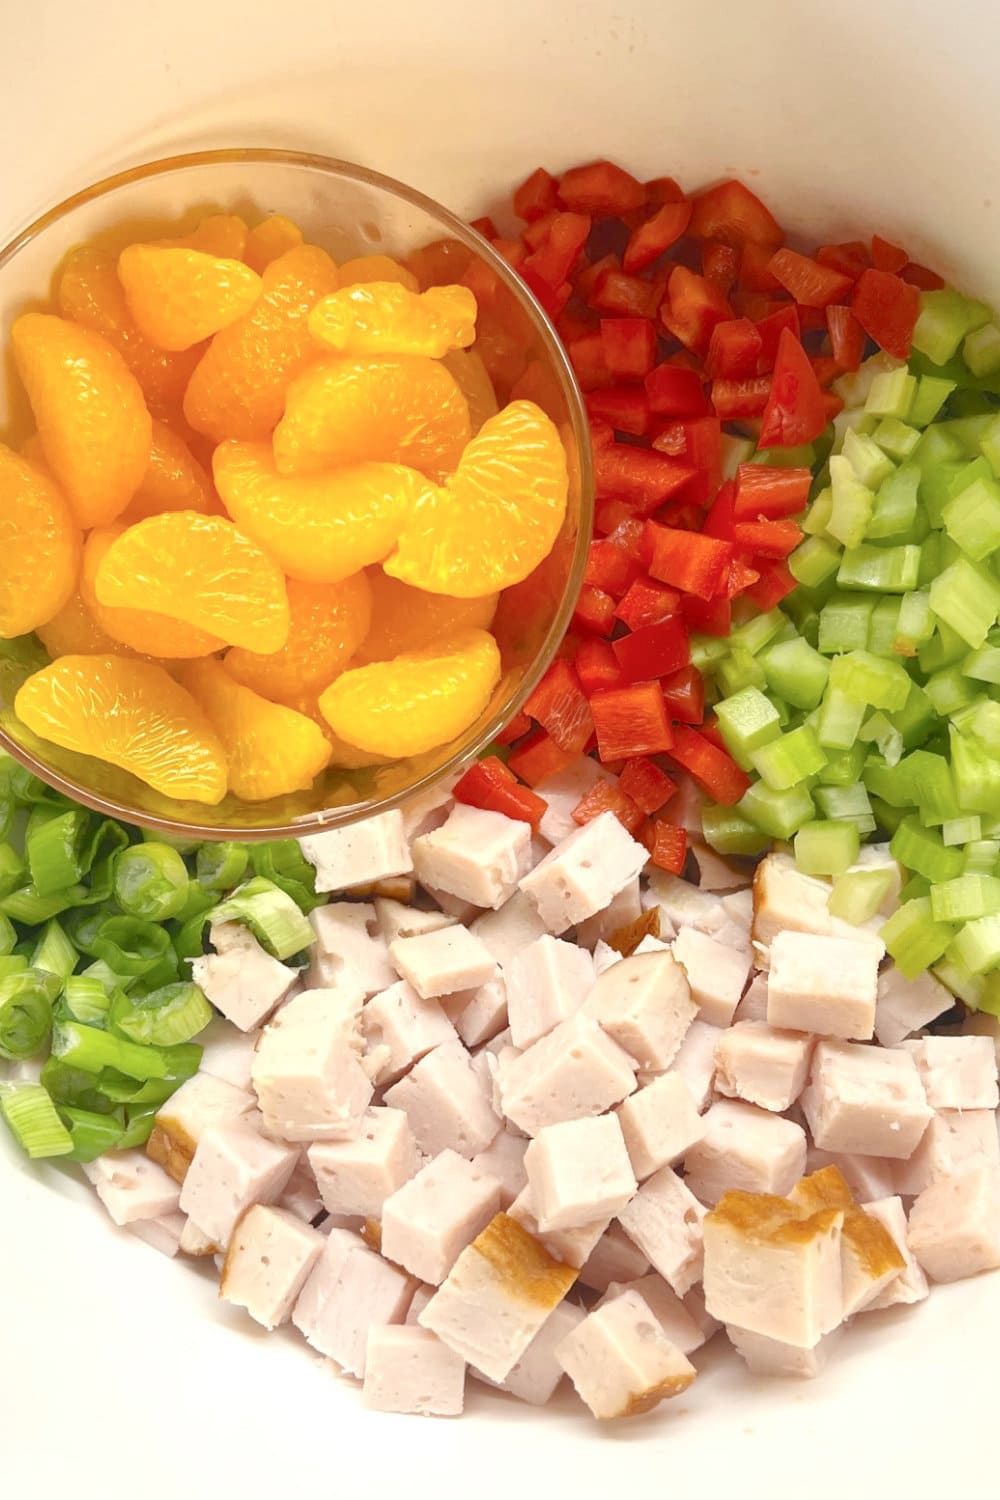 The ingredients ready to make Tropical Turkey Salad. 